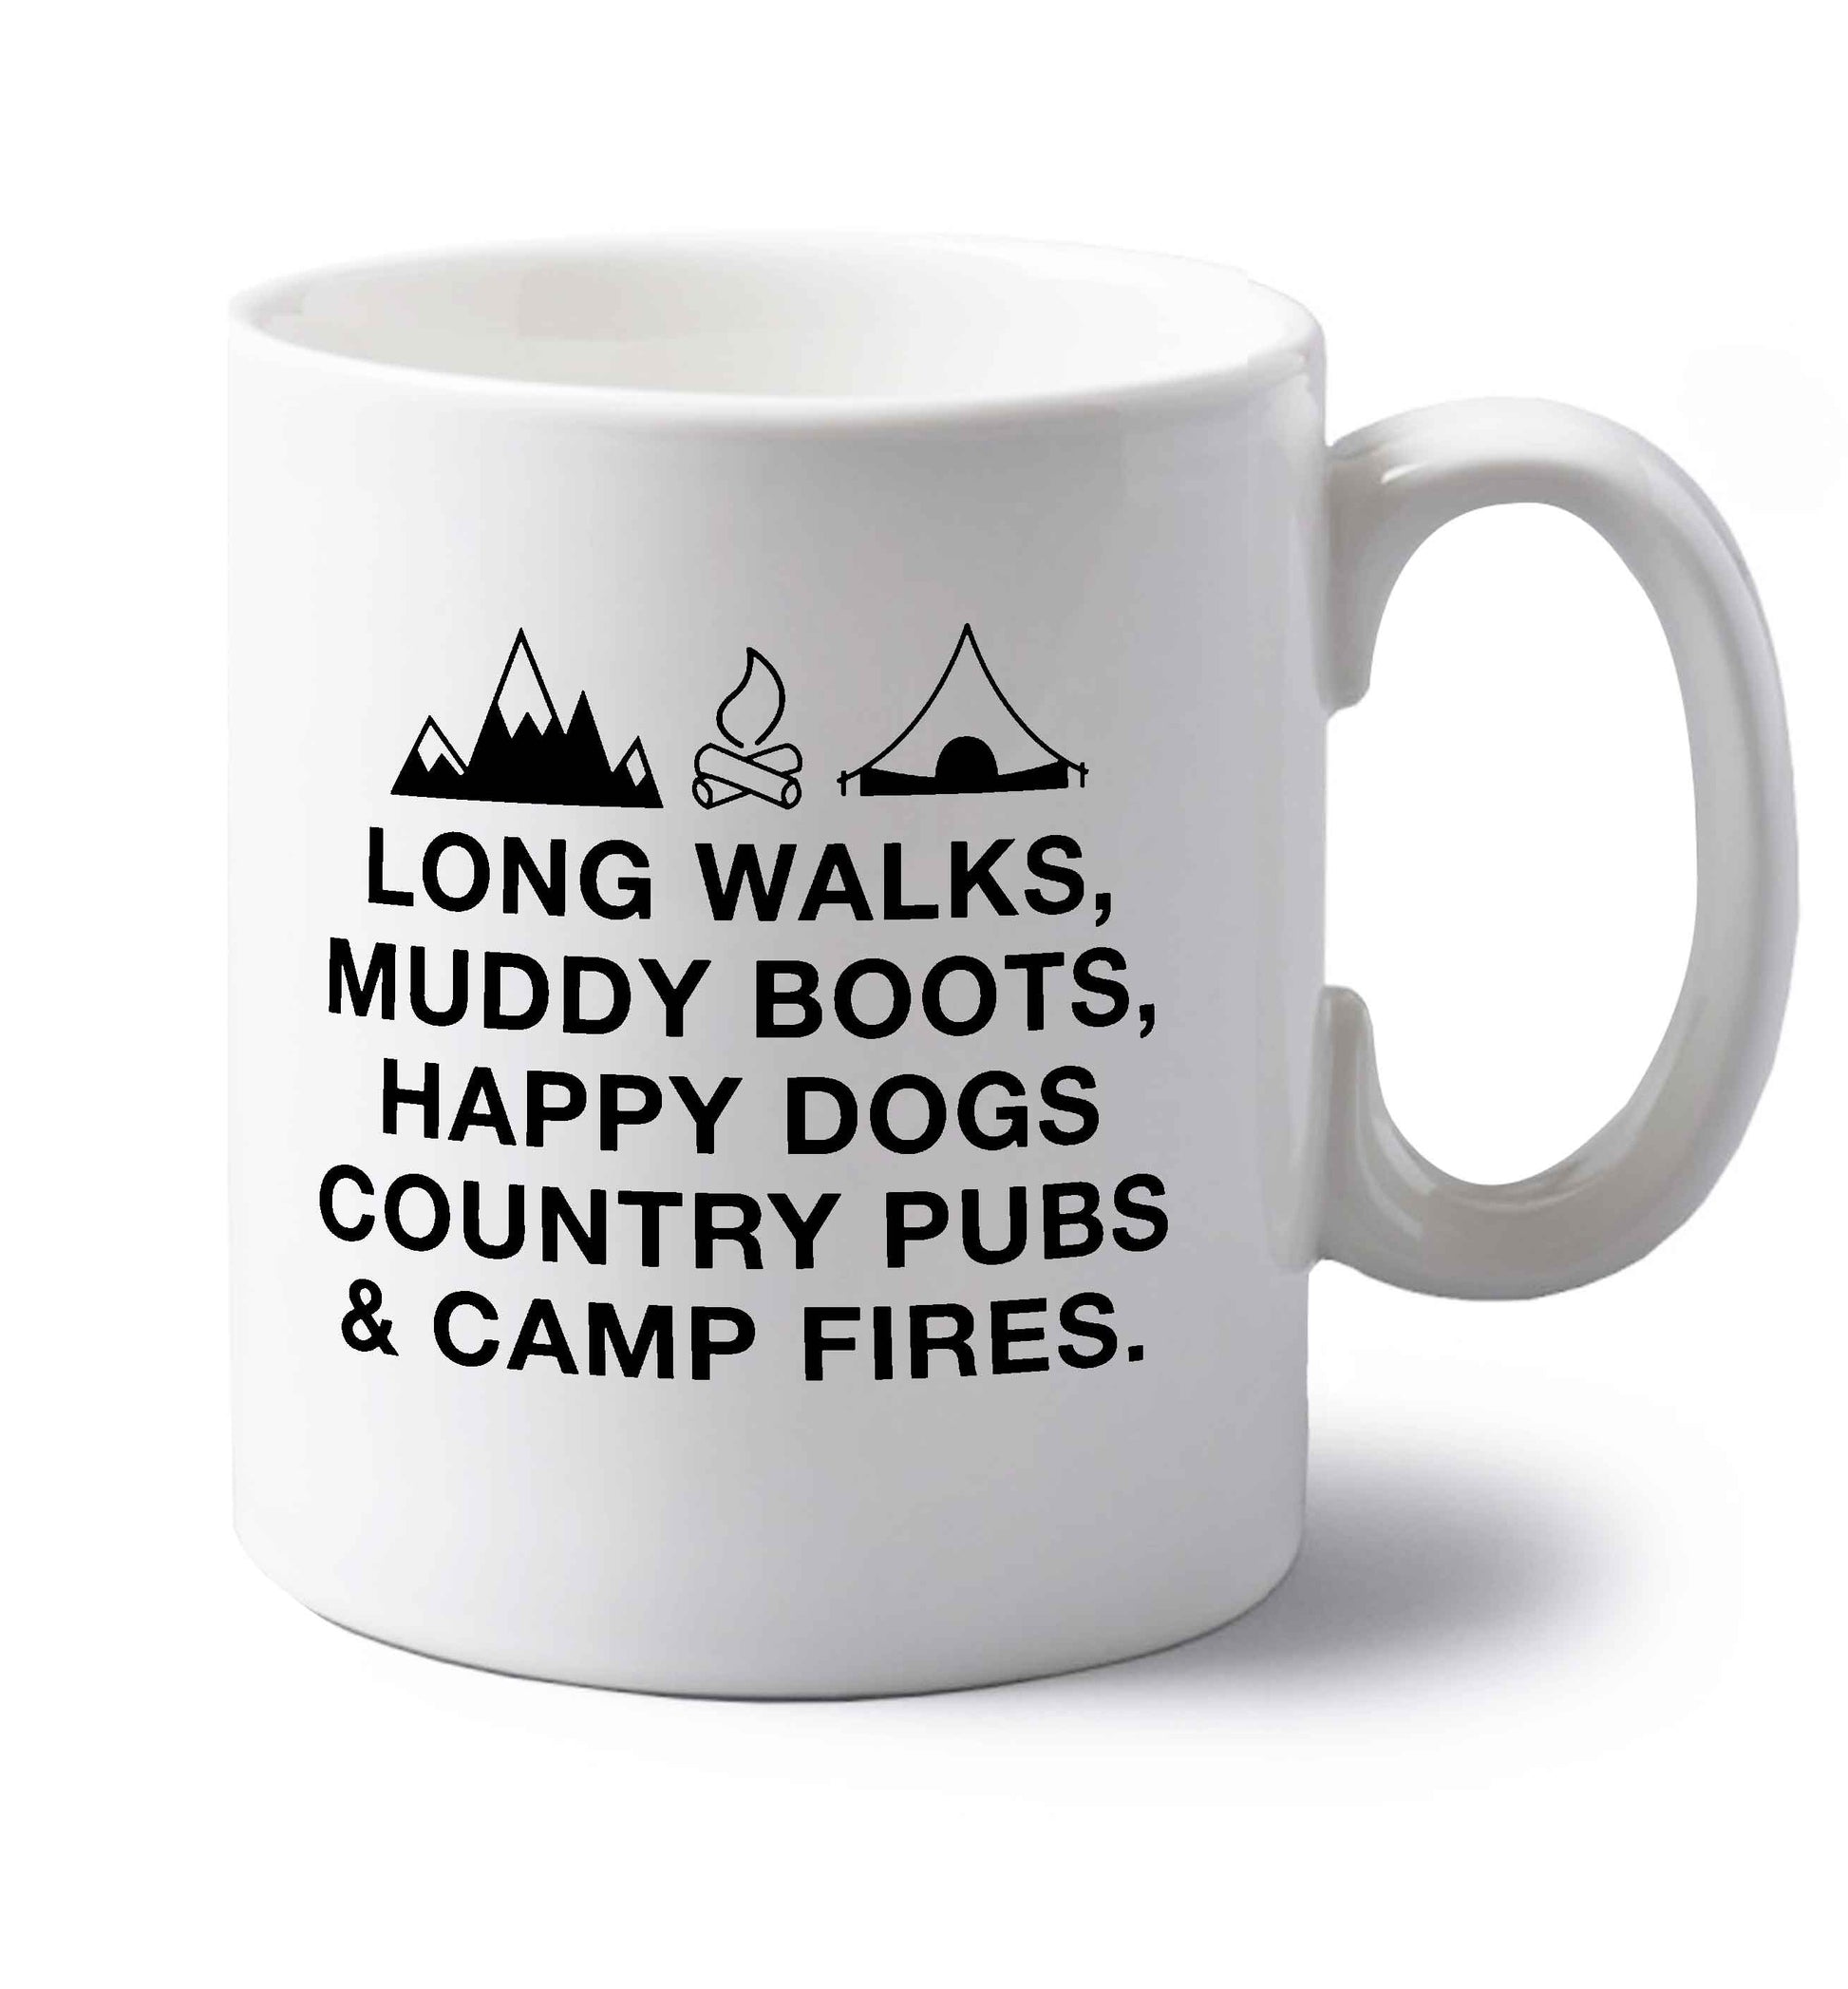 Long walks muddy boots happy dogs country pubs and camp fires left handed white ceramic mug 